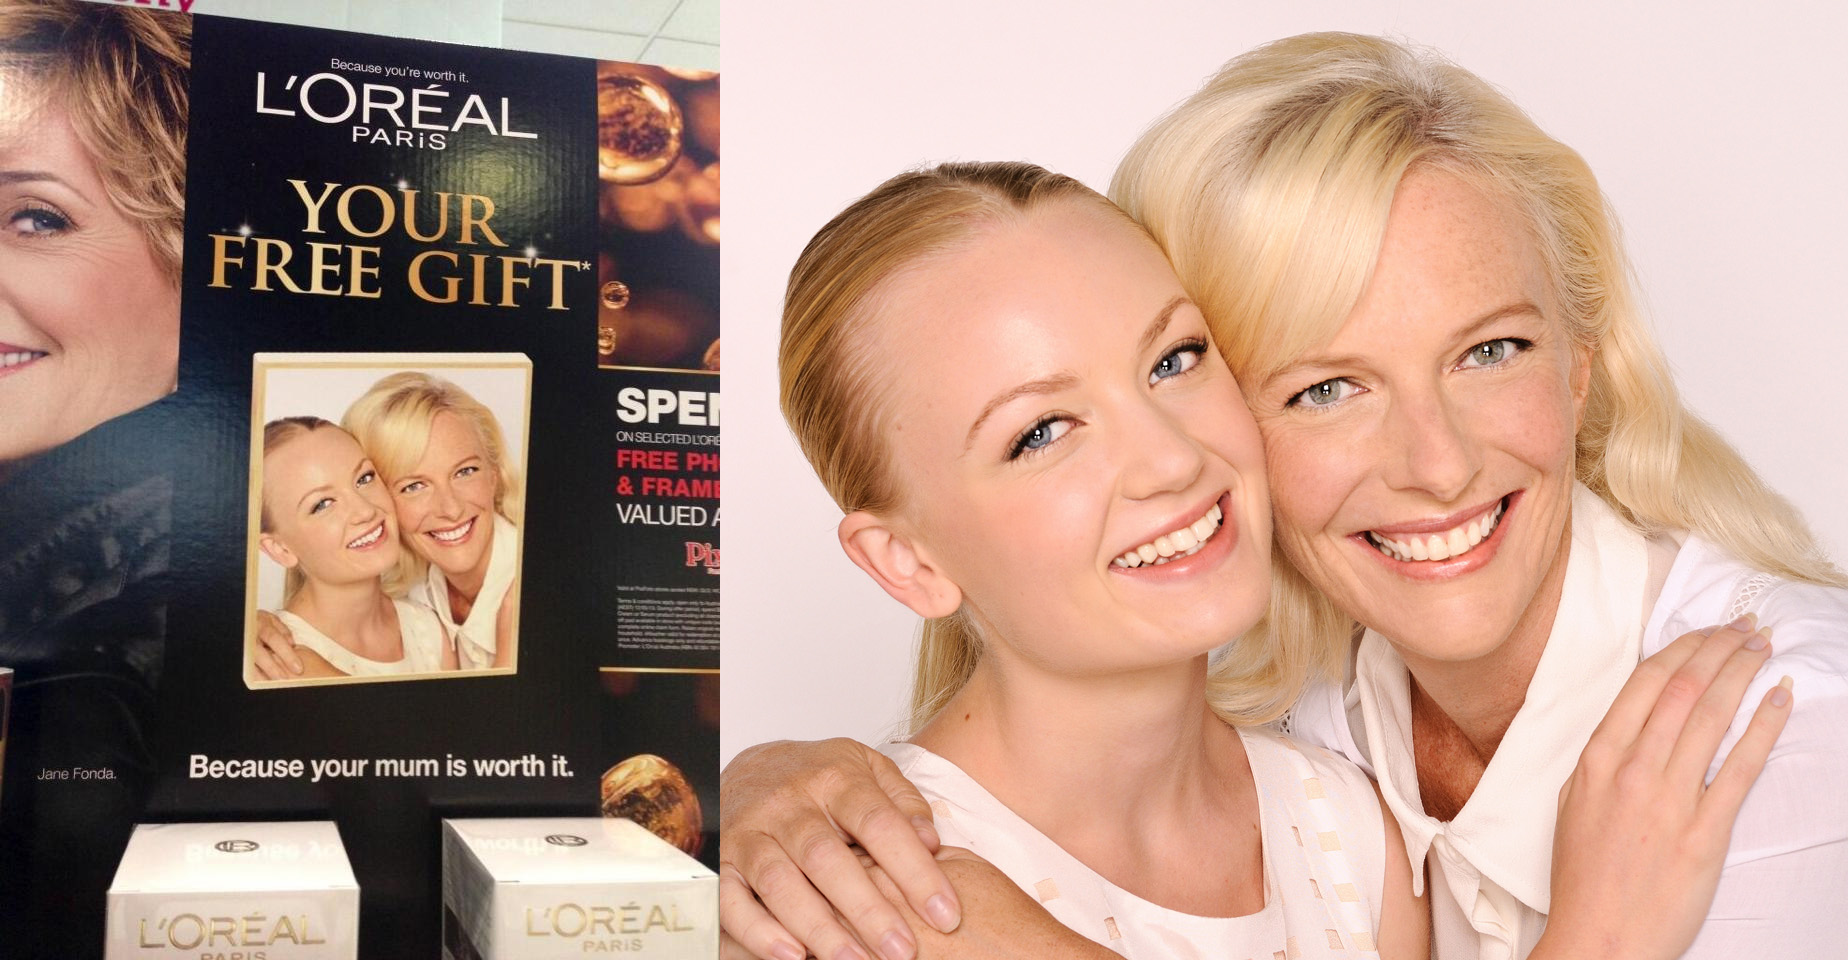 L'oreal mothersday promotional image for POS. Portrait of moter and daughter, beauty bhotography by Kent Johnson.